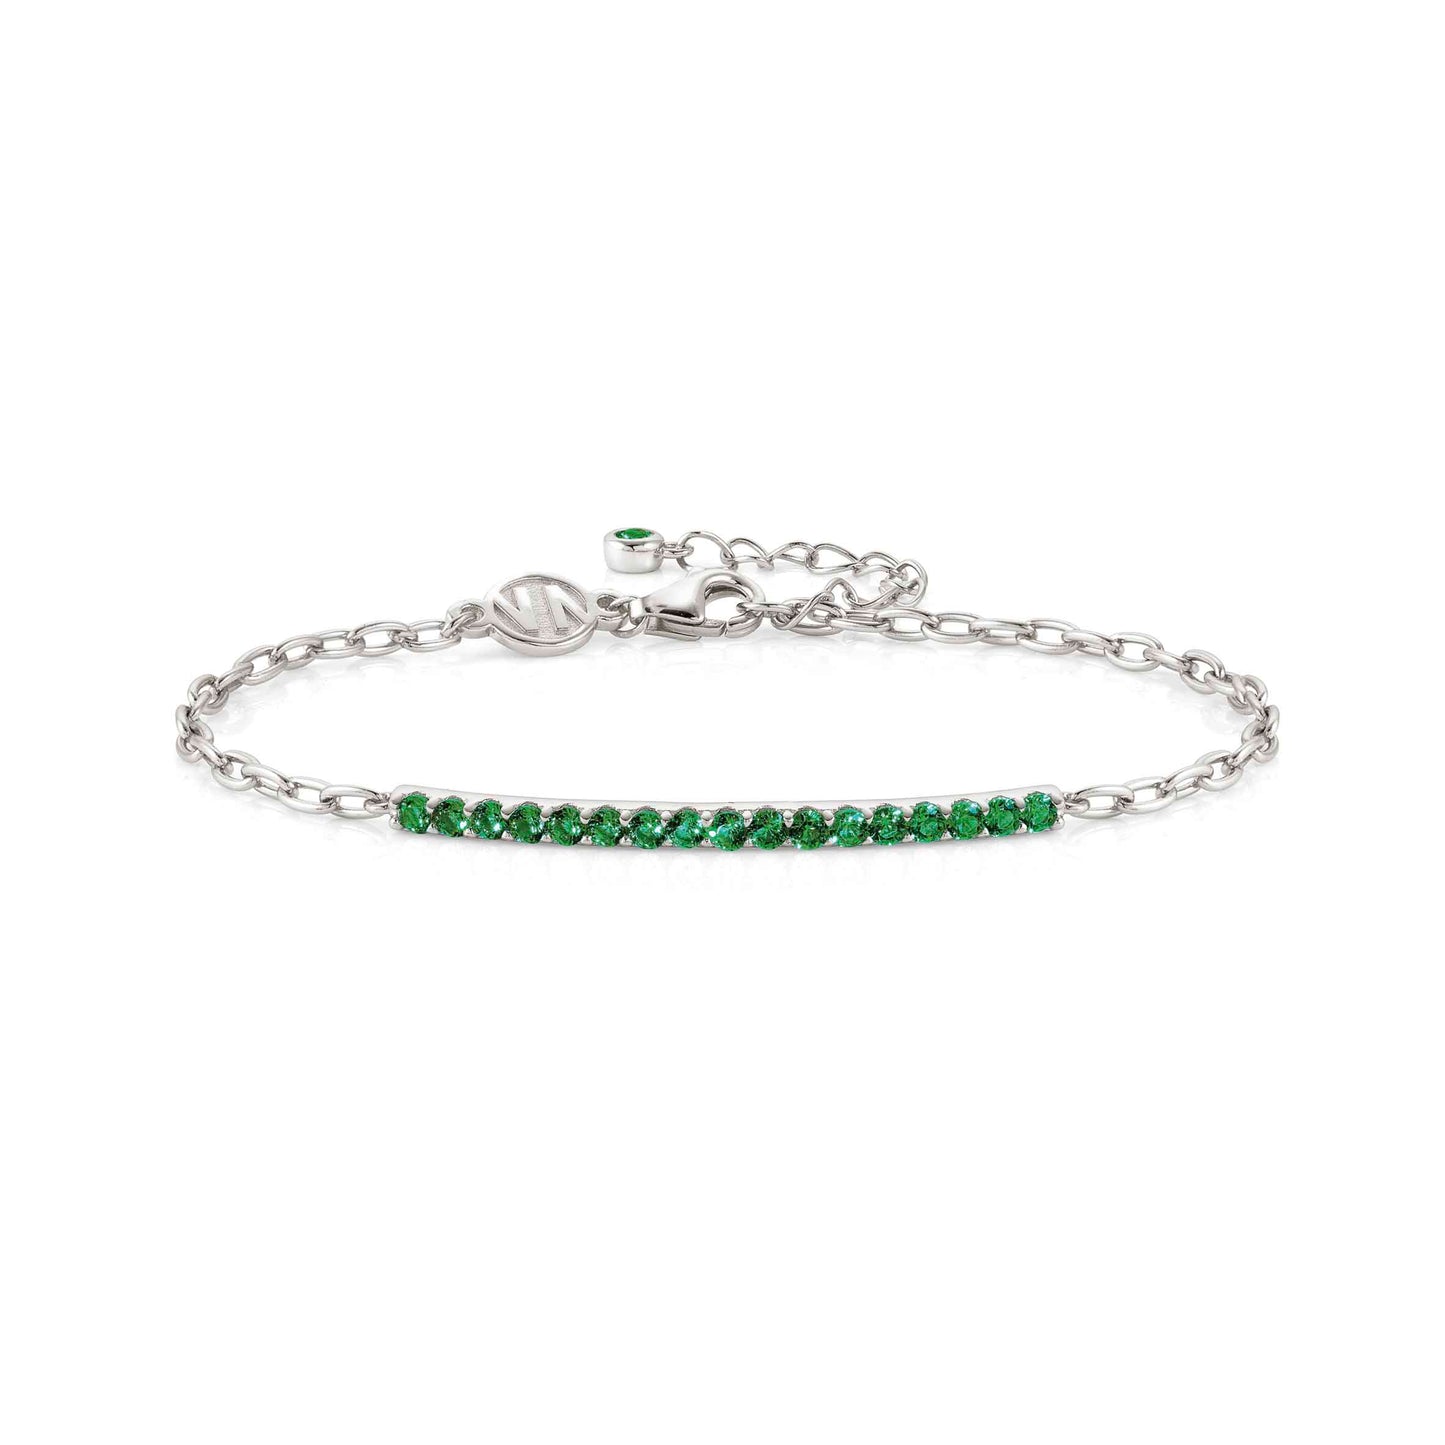 149703/015 LOVELIGHT Sterling Silver Bracelet with Green Cubic Zirconia Stones